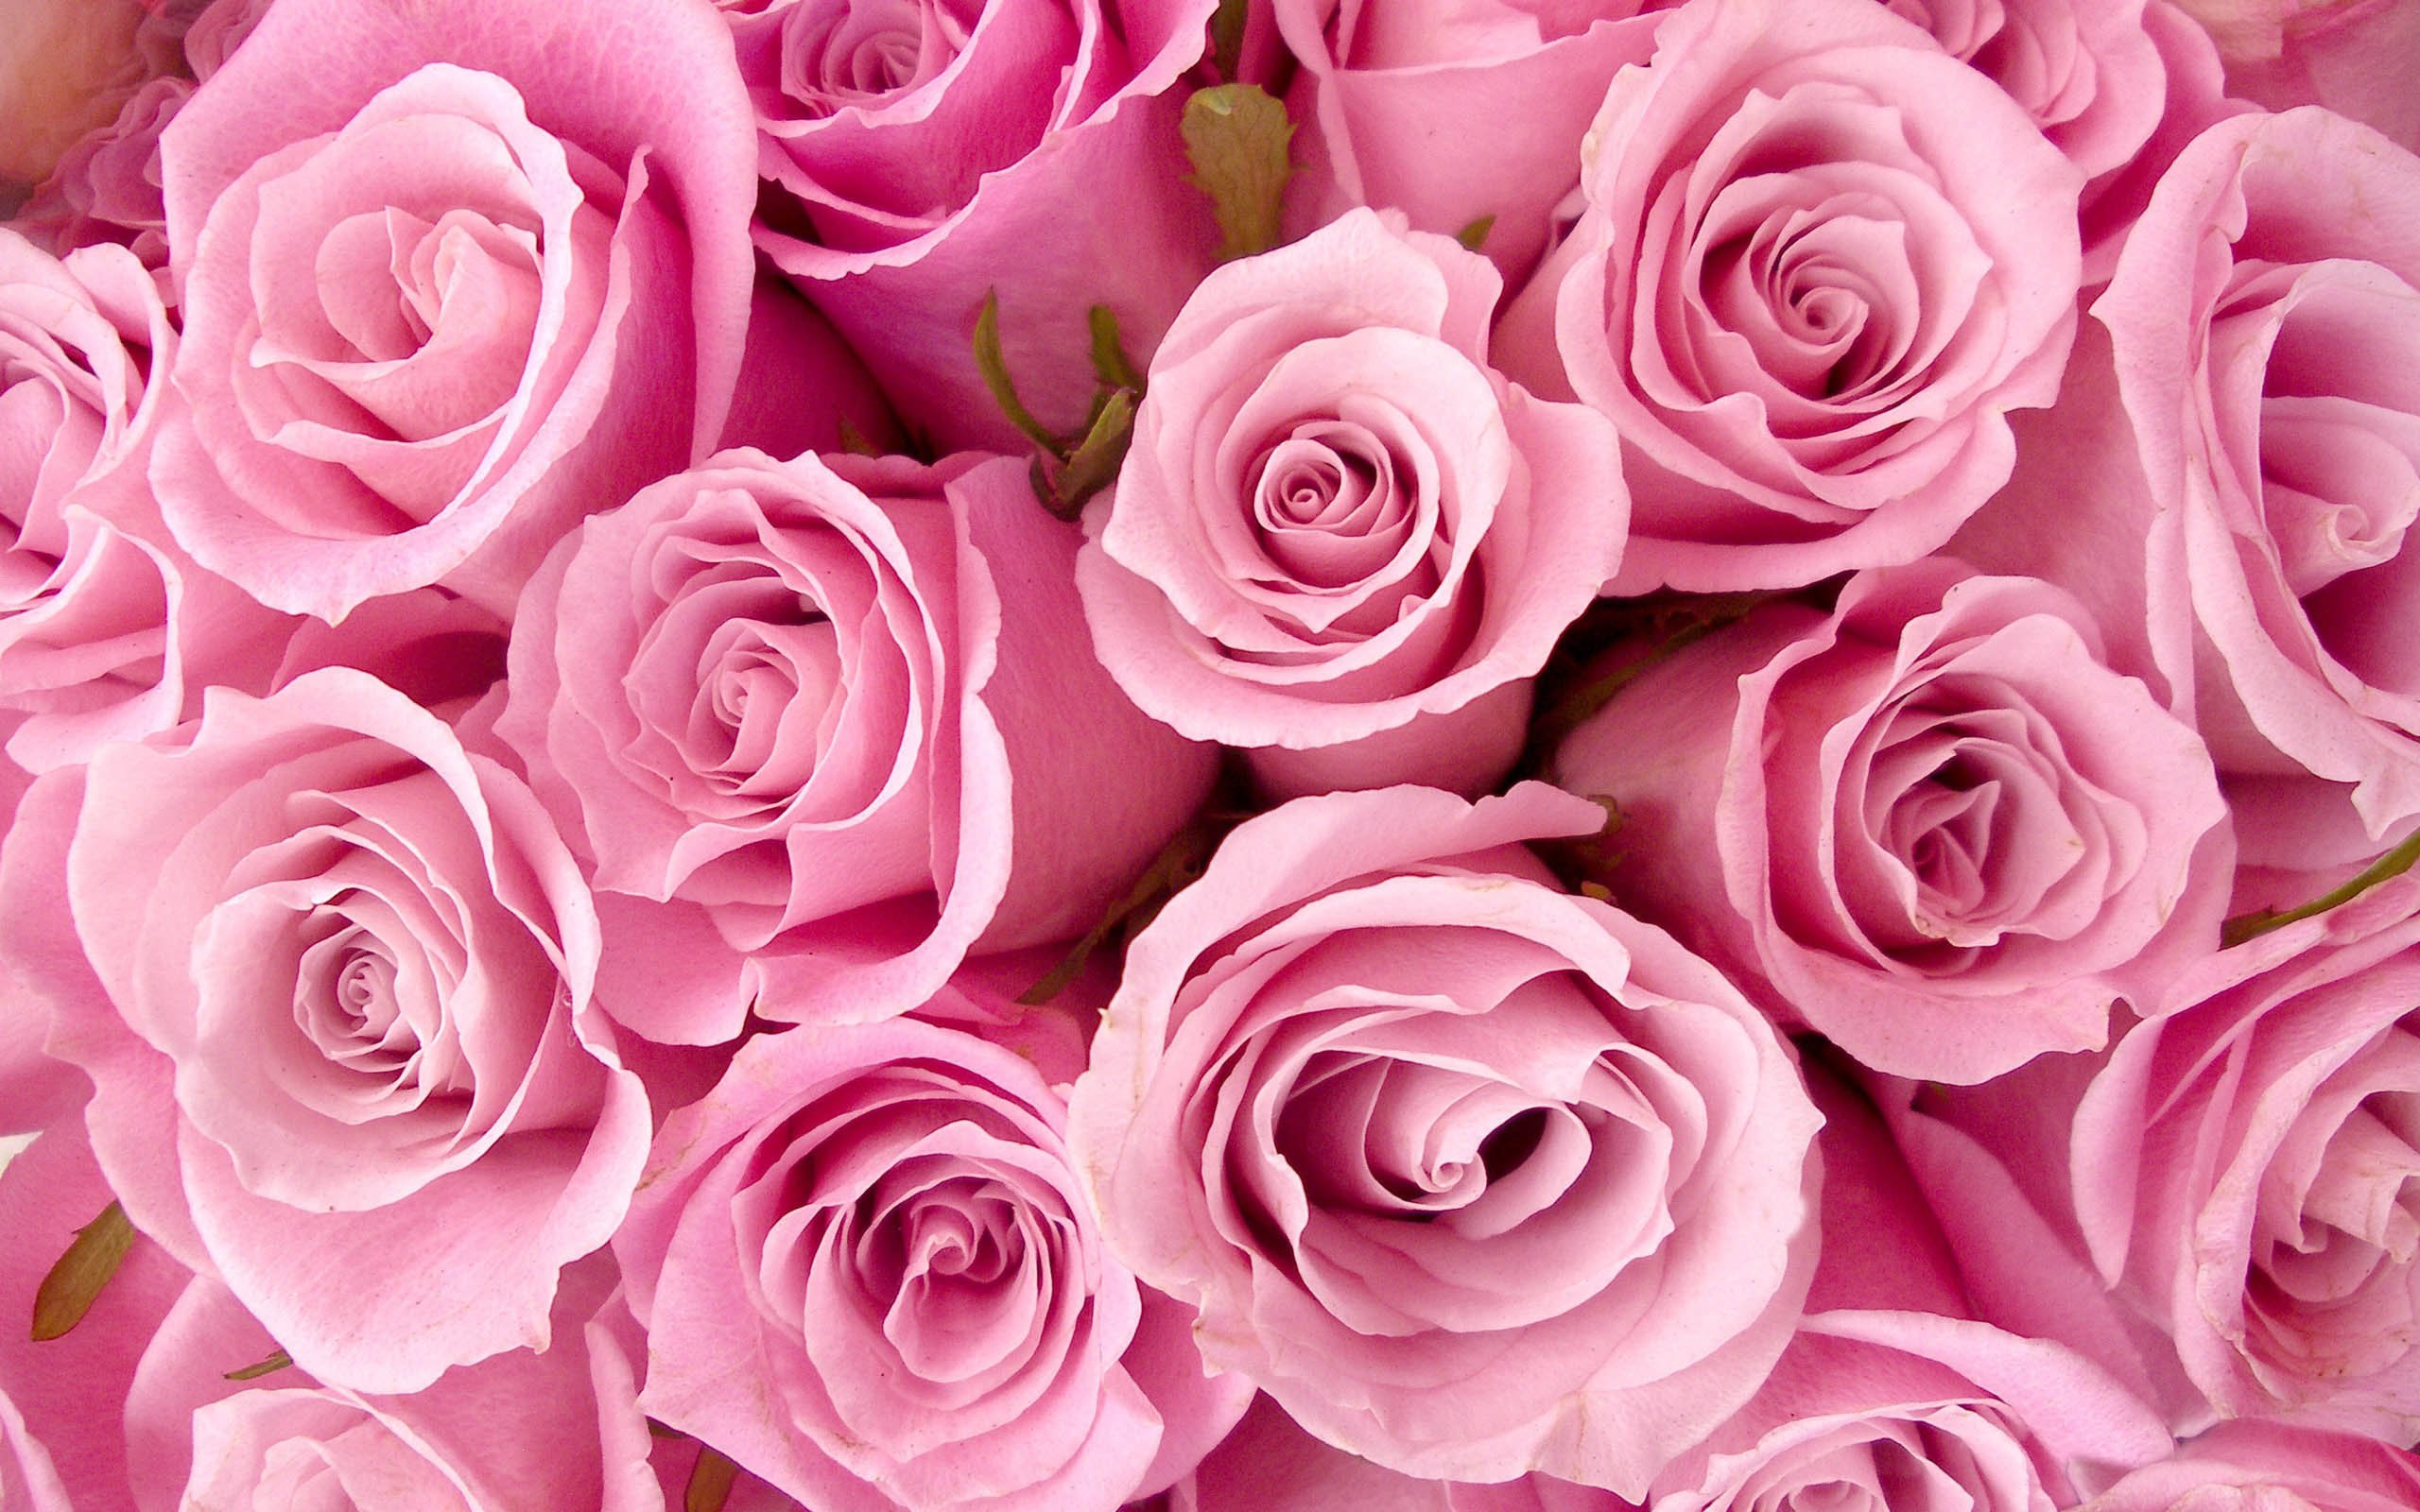 Gorgeous Roses The Meaning of Rose Colors [35 PICS] 2560x1600